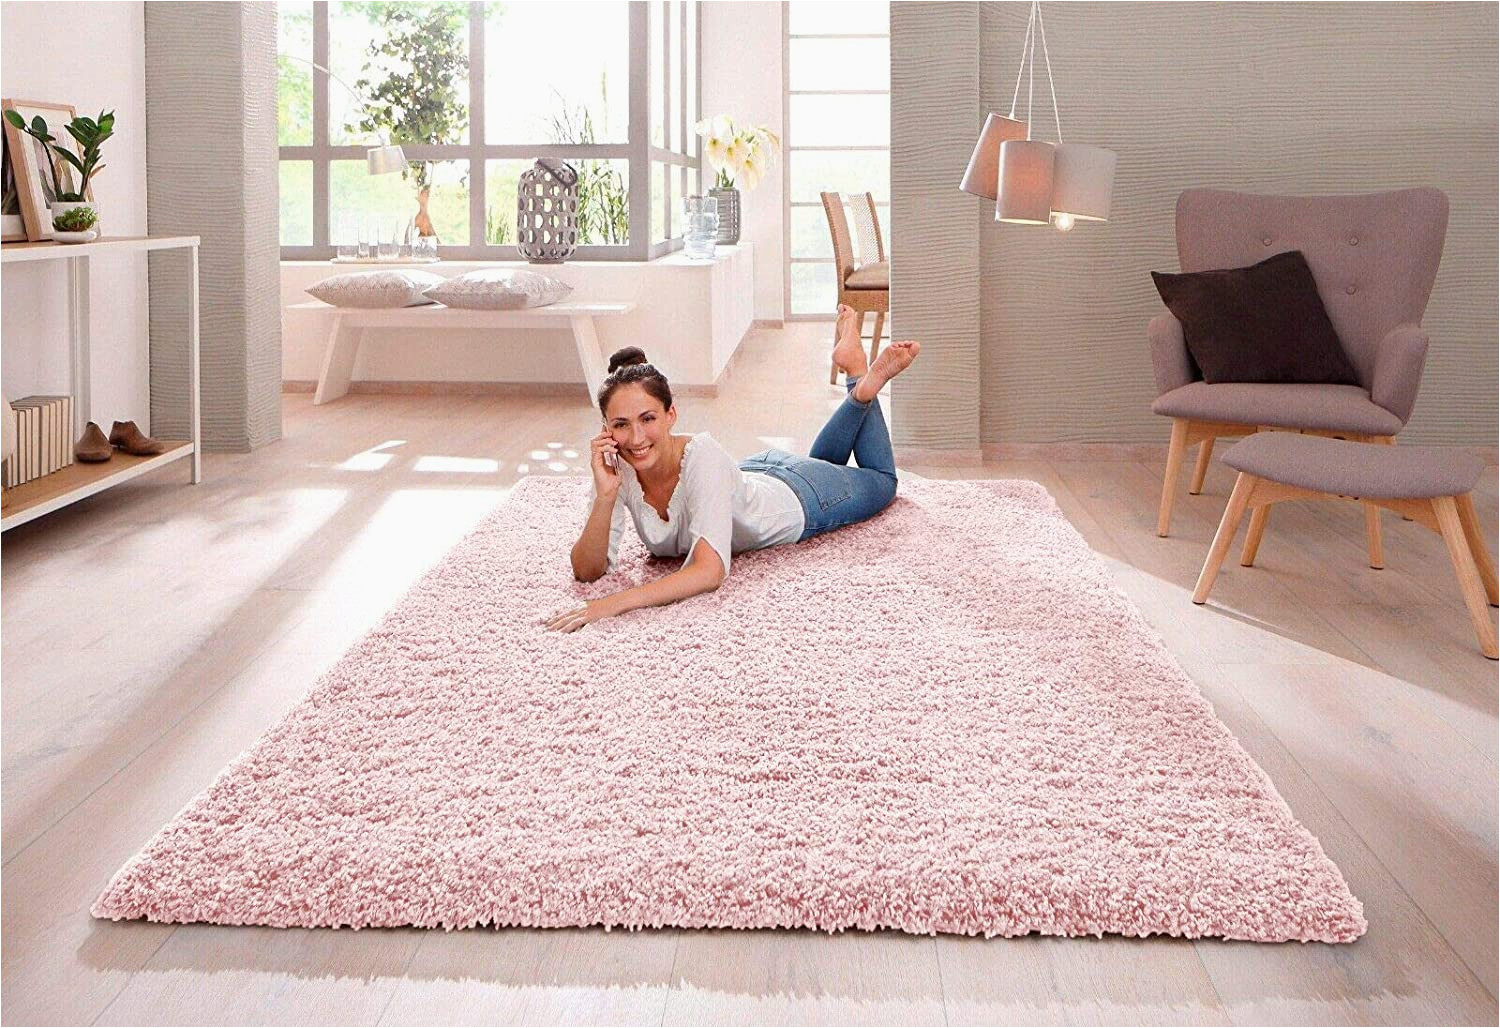 Extra Large soft area Rugs Buy Shaggy Rug 30mm / 3cm Modern Rugs Living Room Extra Large …